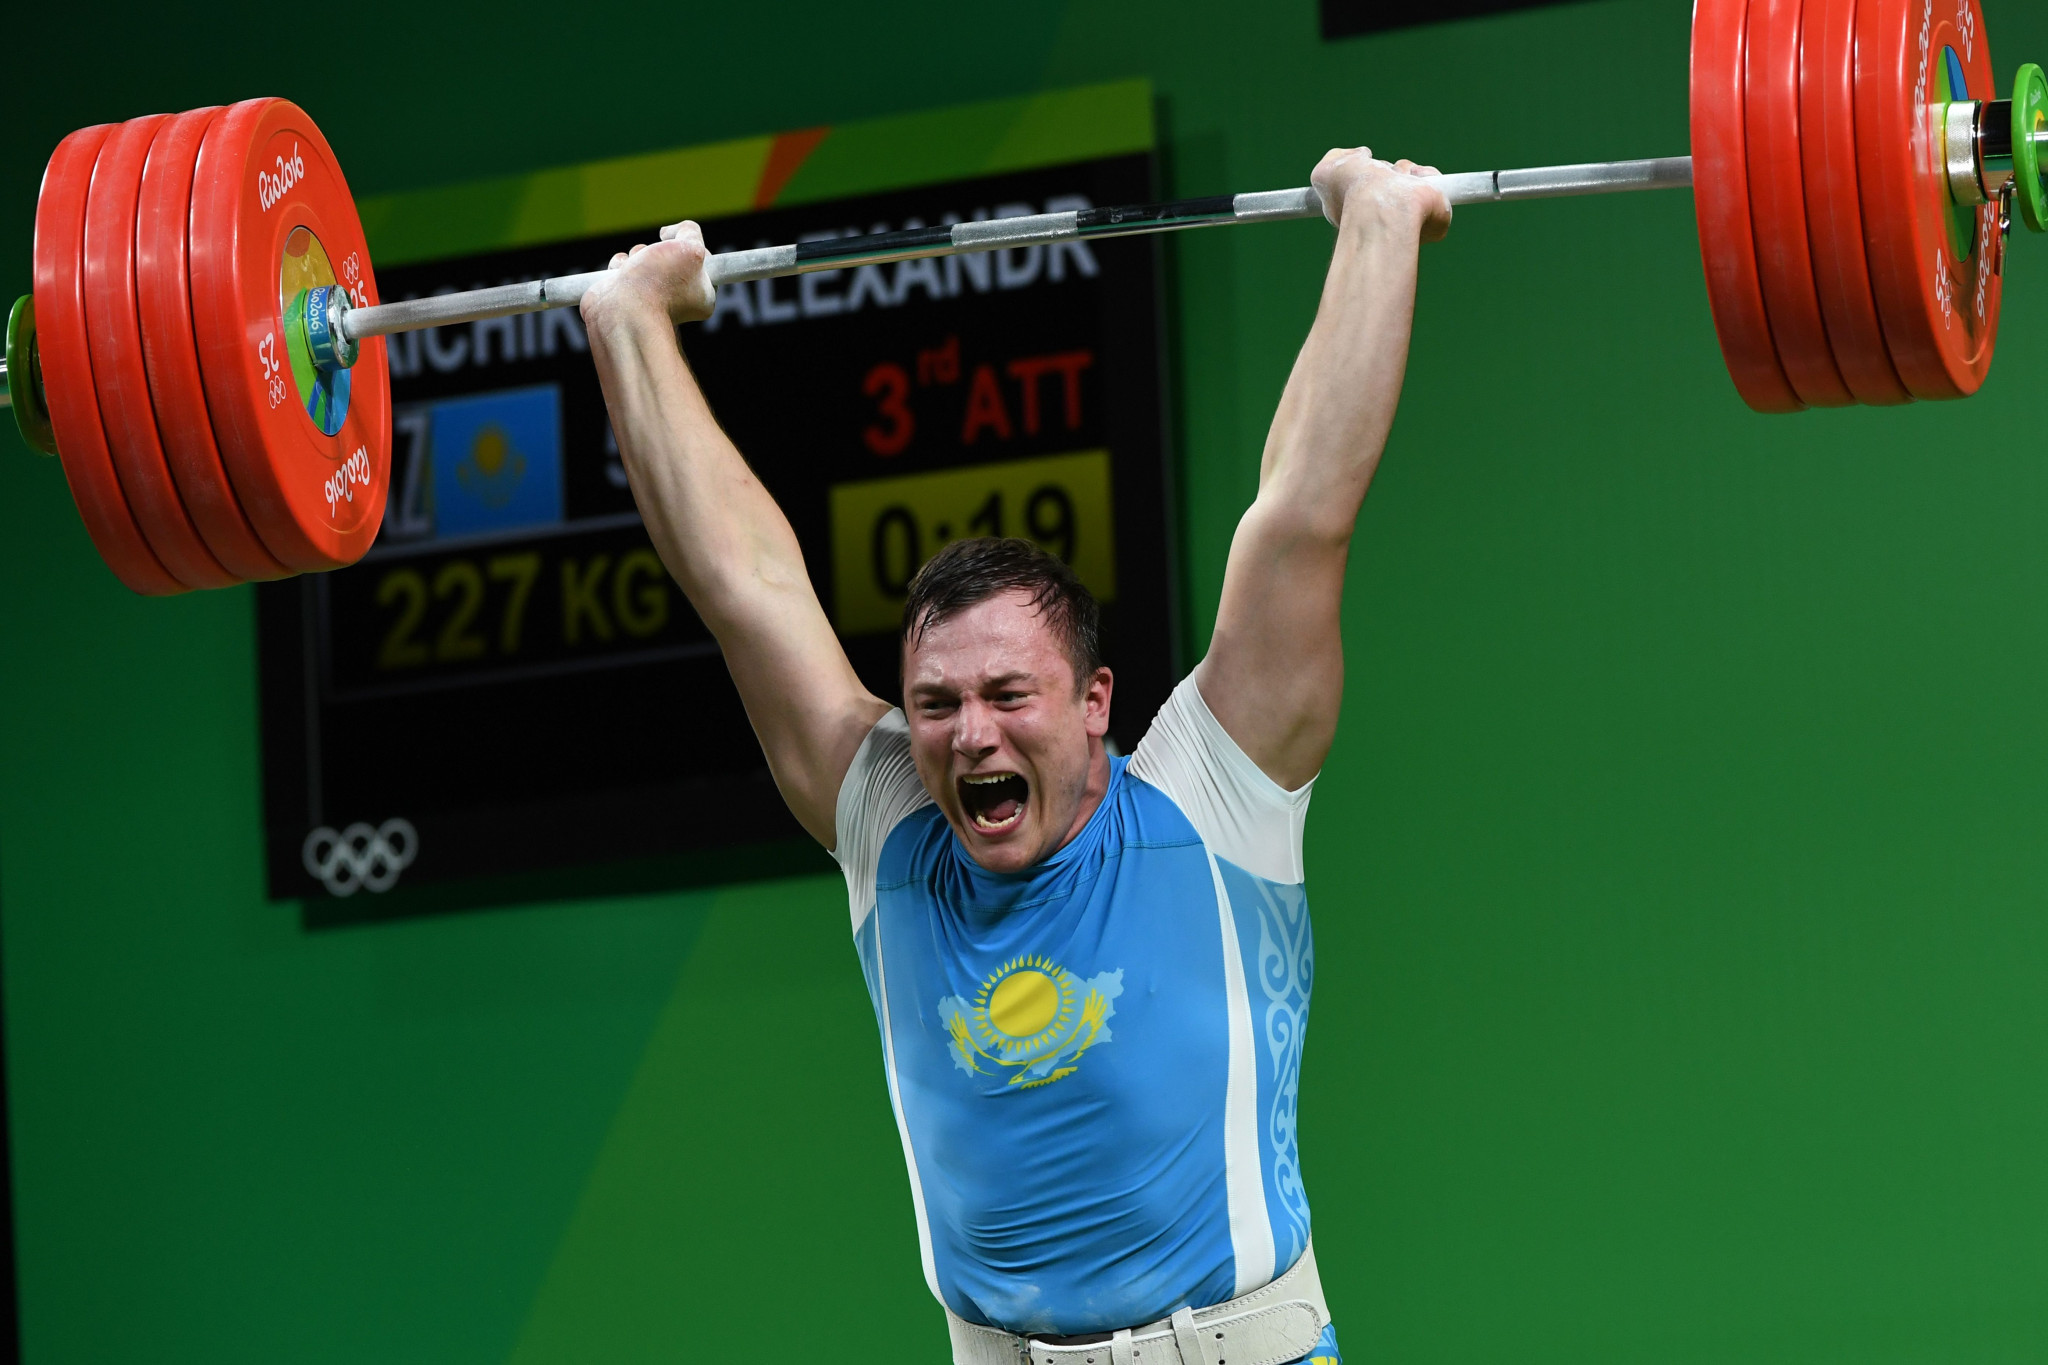 The Kazakhstan Weightlifting Federation decided last month to challenge the qualifying system for the Tokyo 2020 Olympic Games at the Court of Arbitration for Sport ©Getty Images